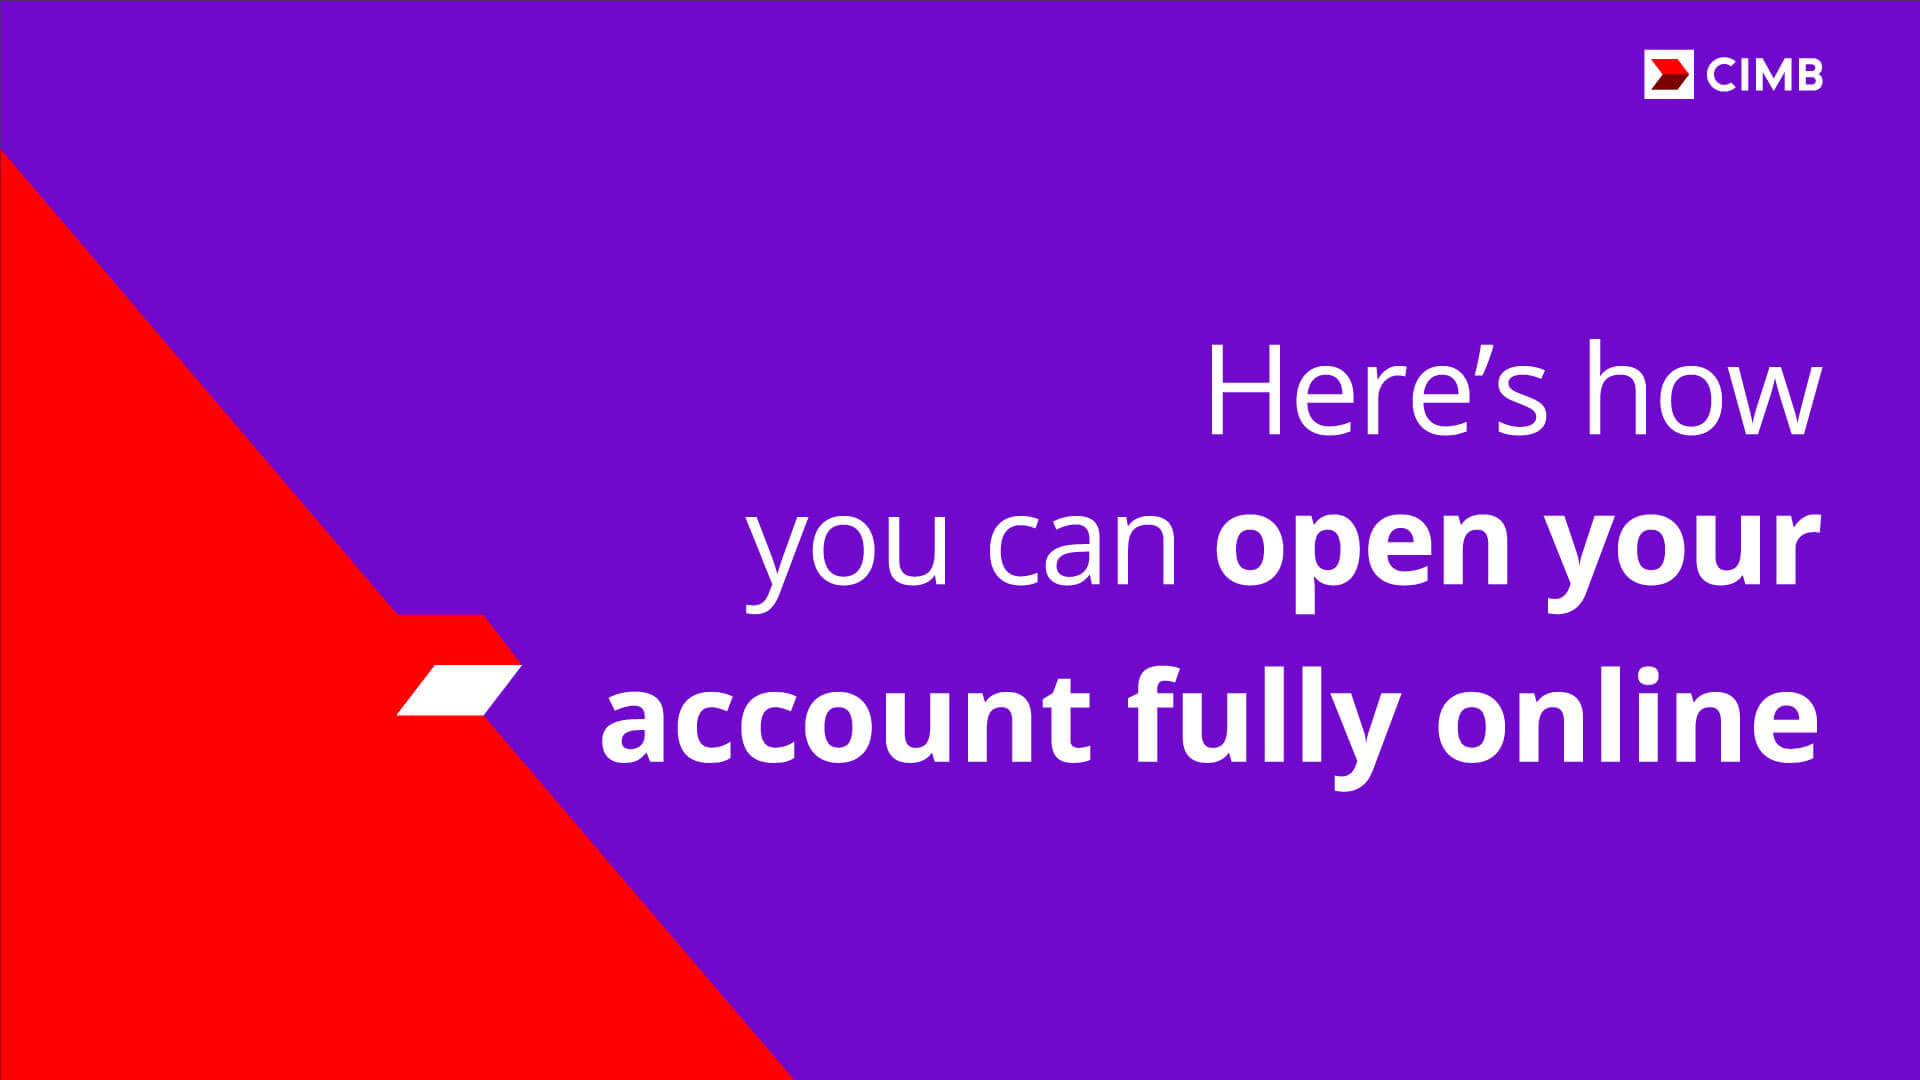 Open Your Account Fully Online